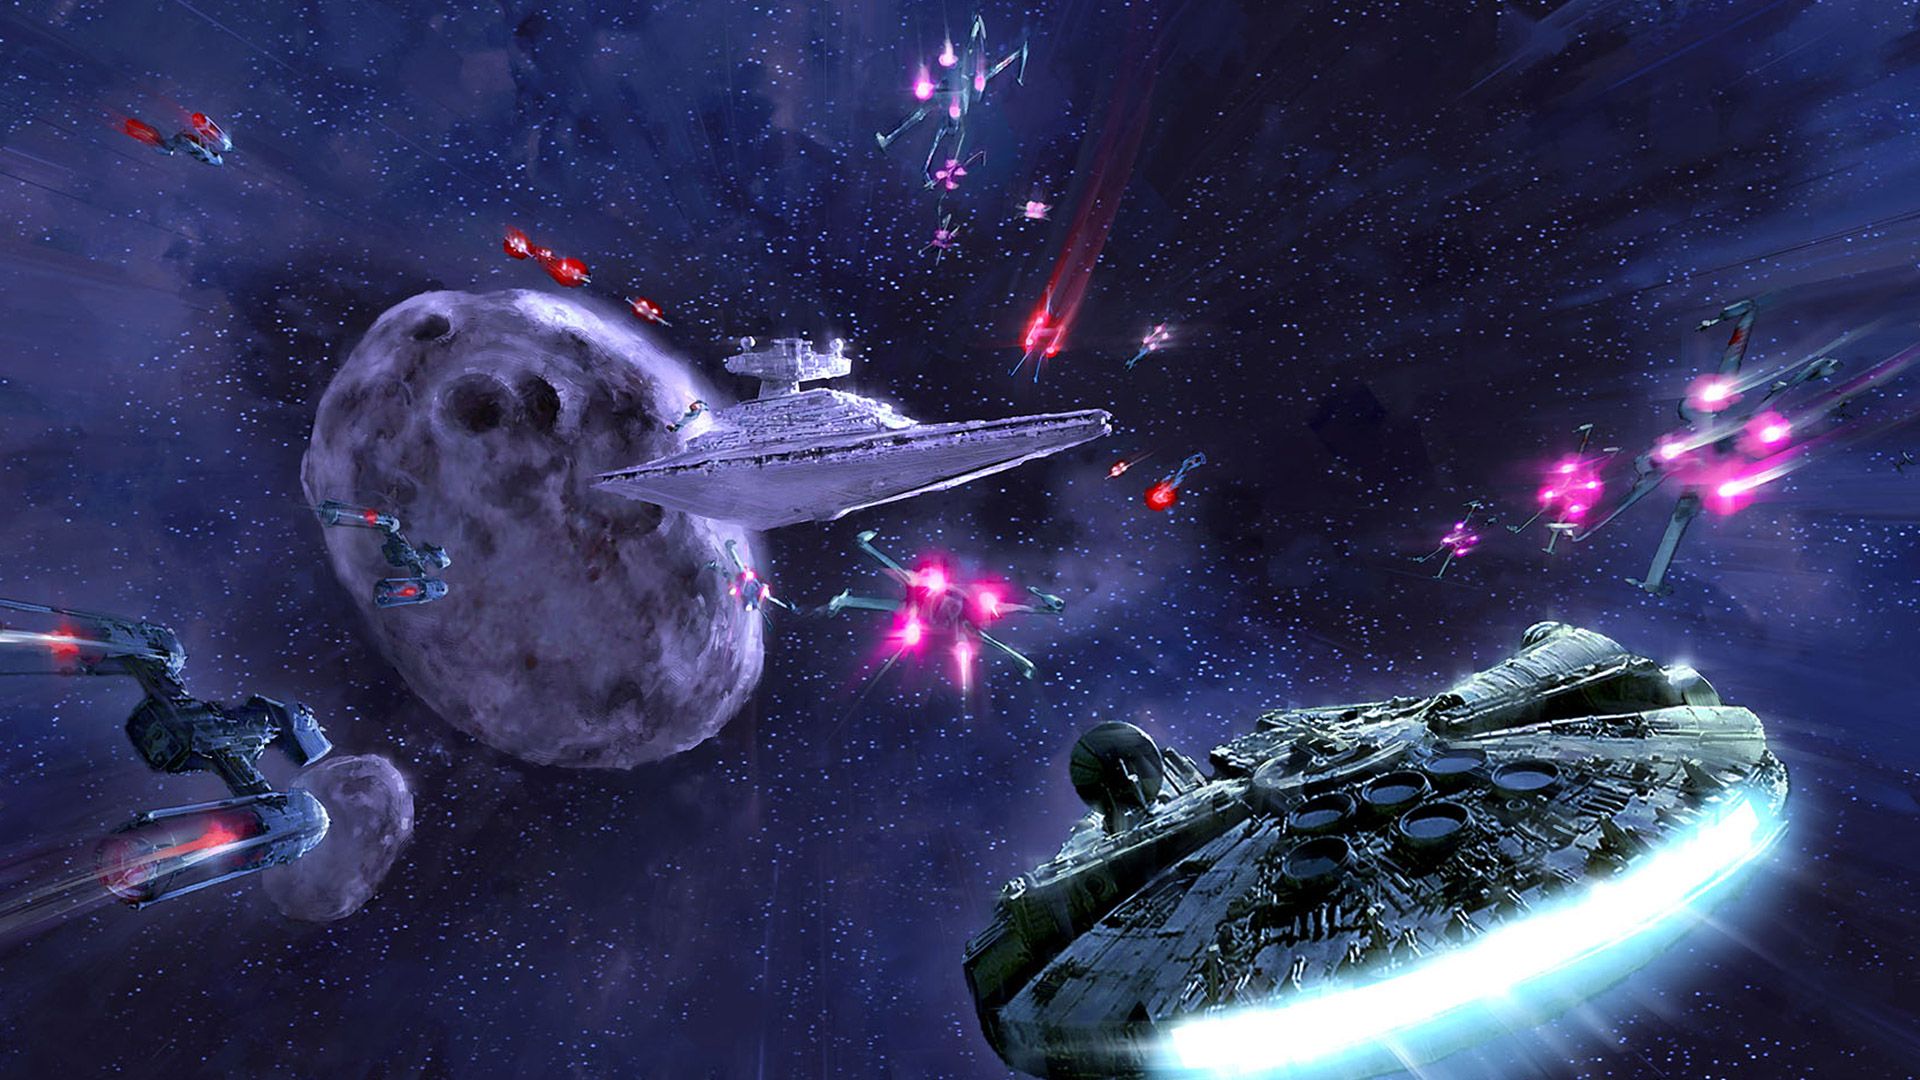 Free Star Wars Battlefront: Renegade Squadron Wallpaper in 1920x1080